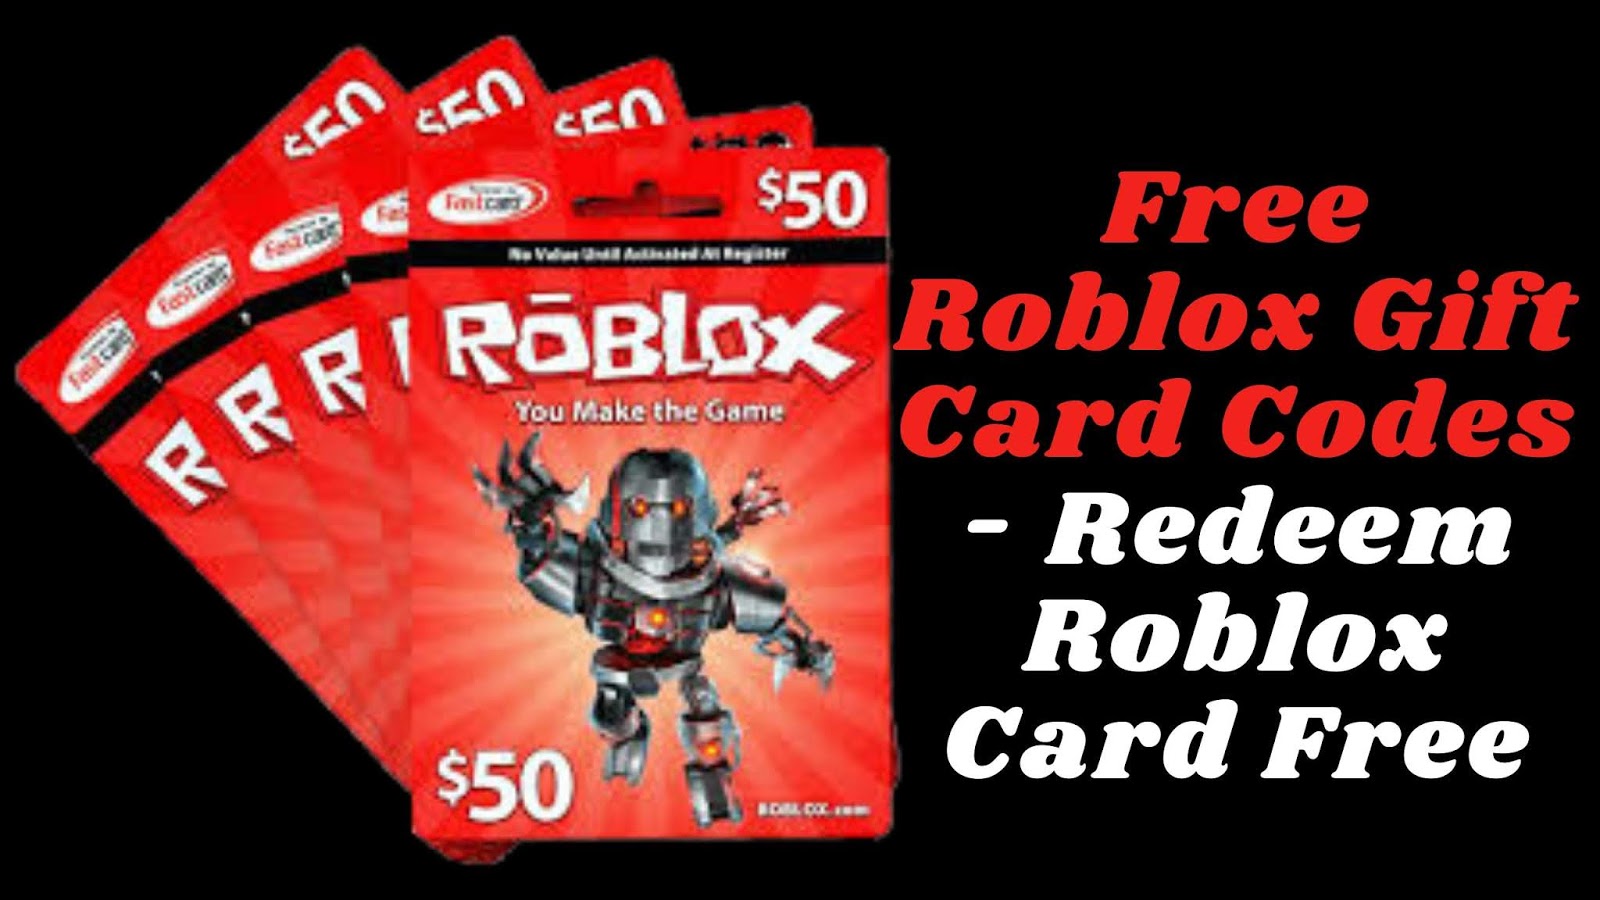 Free Gift Cards Free Roblox Gift Card Codes Redeem Roblox Card Free - roblox cards codes for free